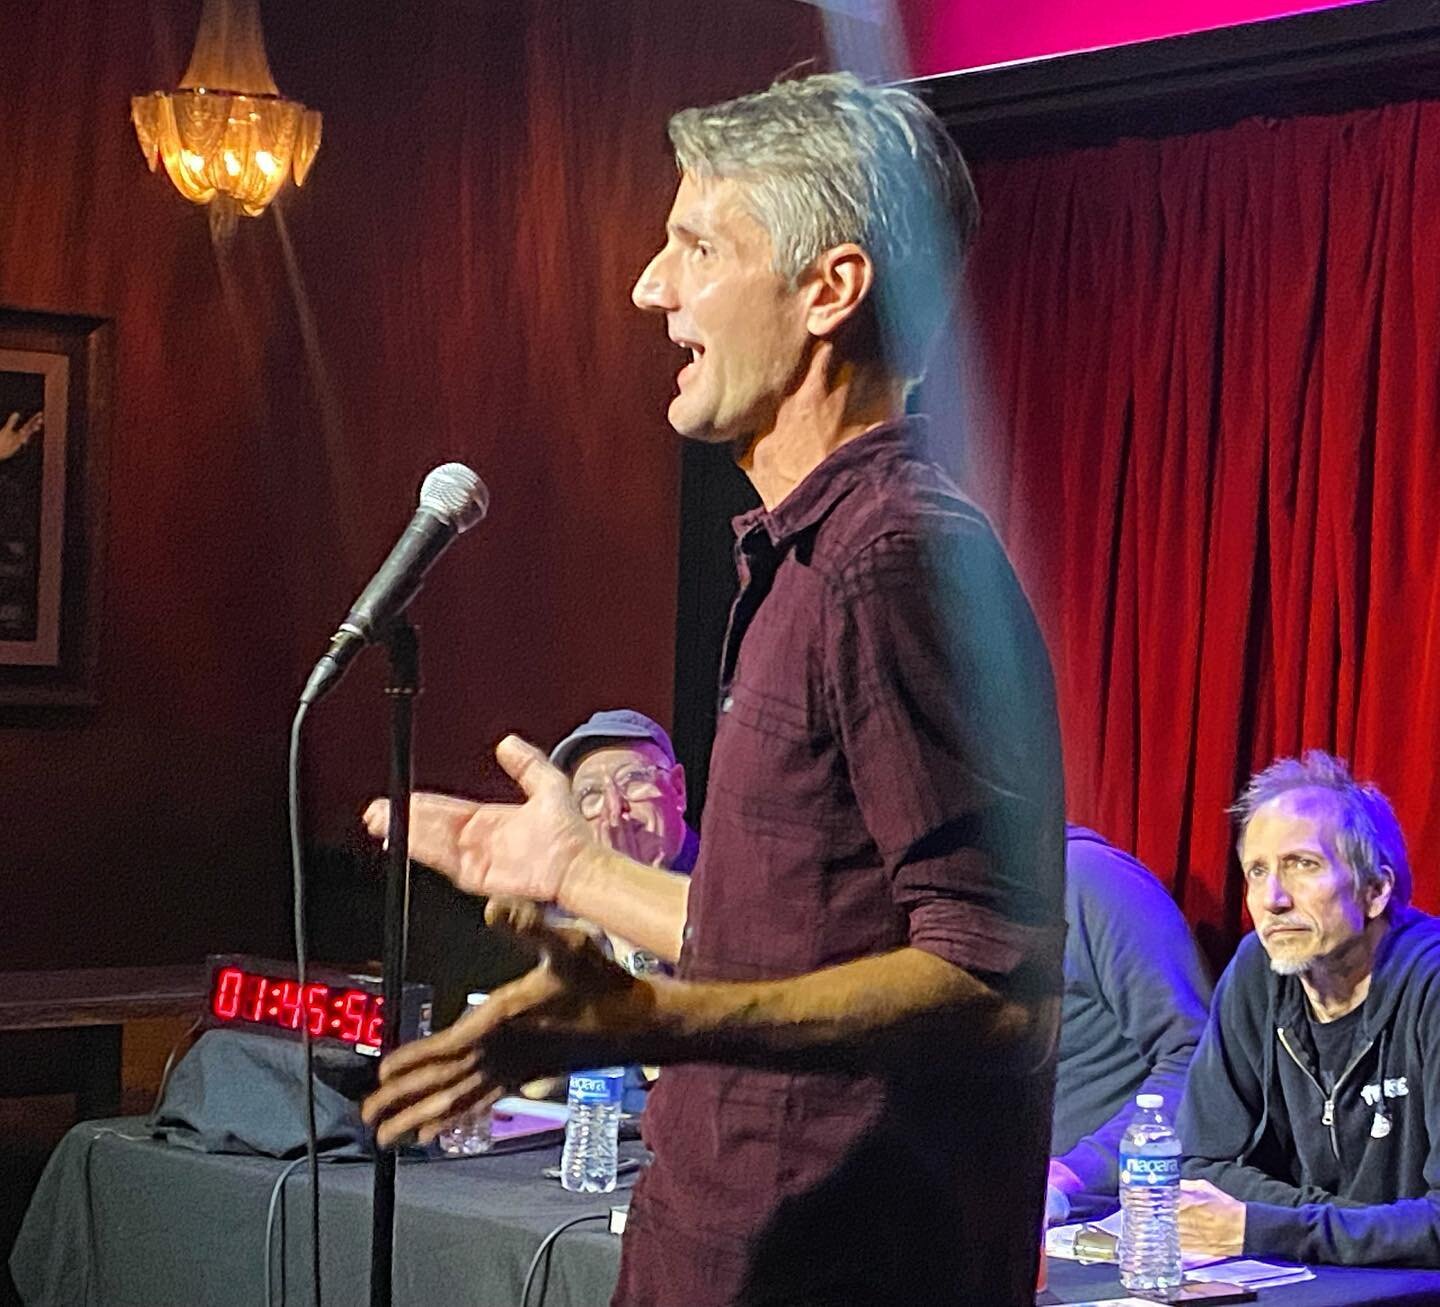 @emersondameron killed it last night at @hollywoodimprov playing Story Smash! Way to go Emerson! Good times at the @hollywoodimprov !! A special things to the judges who came out @dannyzuker #blainecapatch and @mattoswalt ! We had a blast! #spinthatw